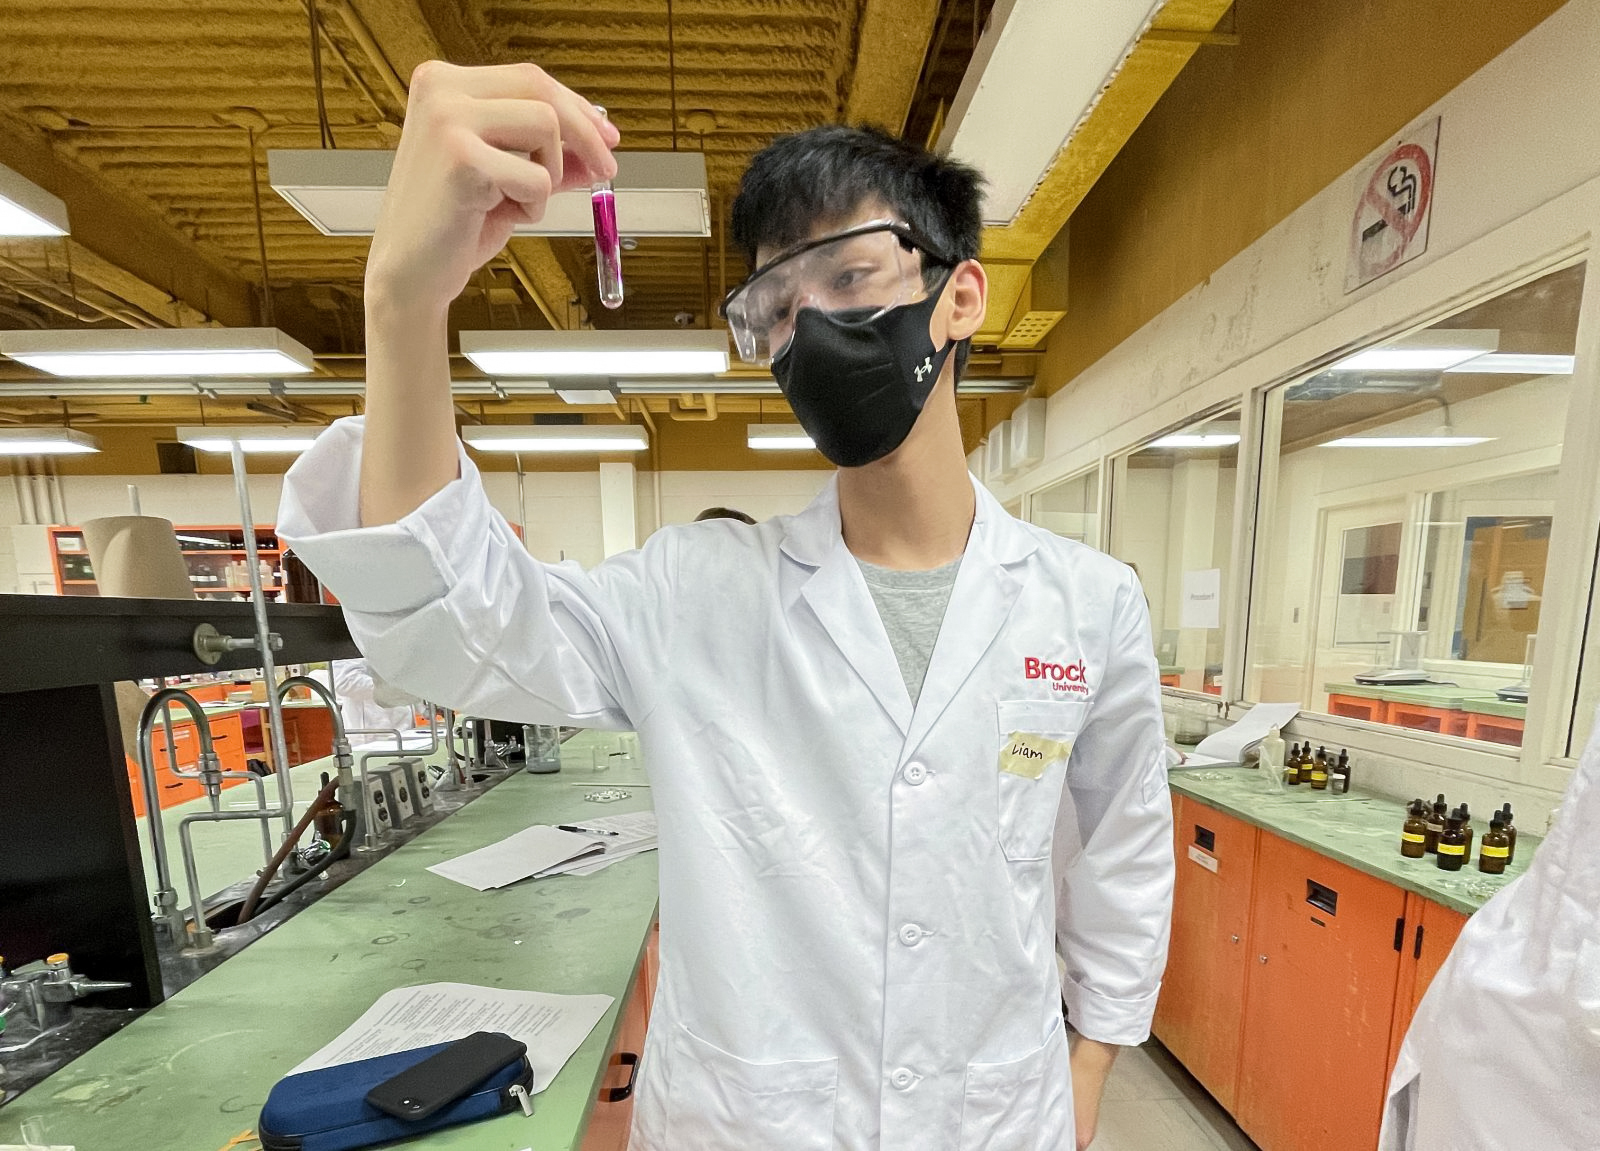 Former Brock University student Liam Jacob Zisman is in a Brock University science lab in the Fall of 2021. He is wearing a white Brock University lab coat, safety glasses and a face mask while looking at a test tube of clear liquid mixing with a red liquid.